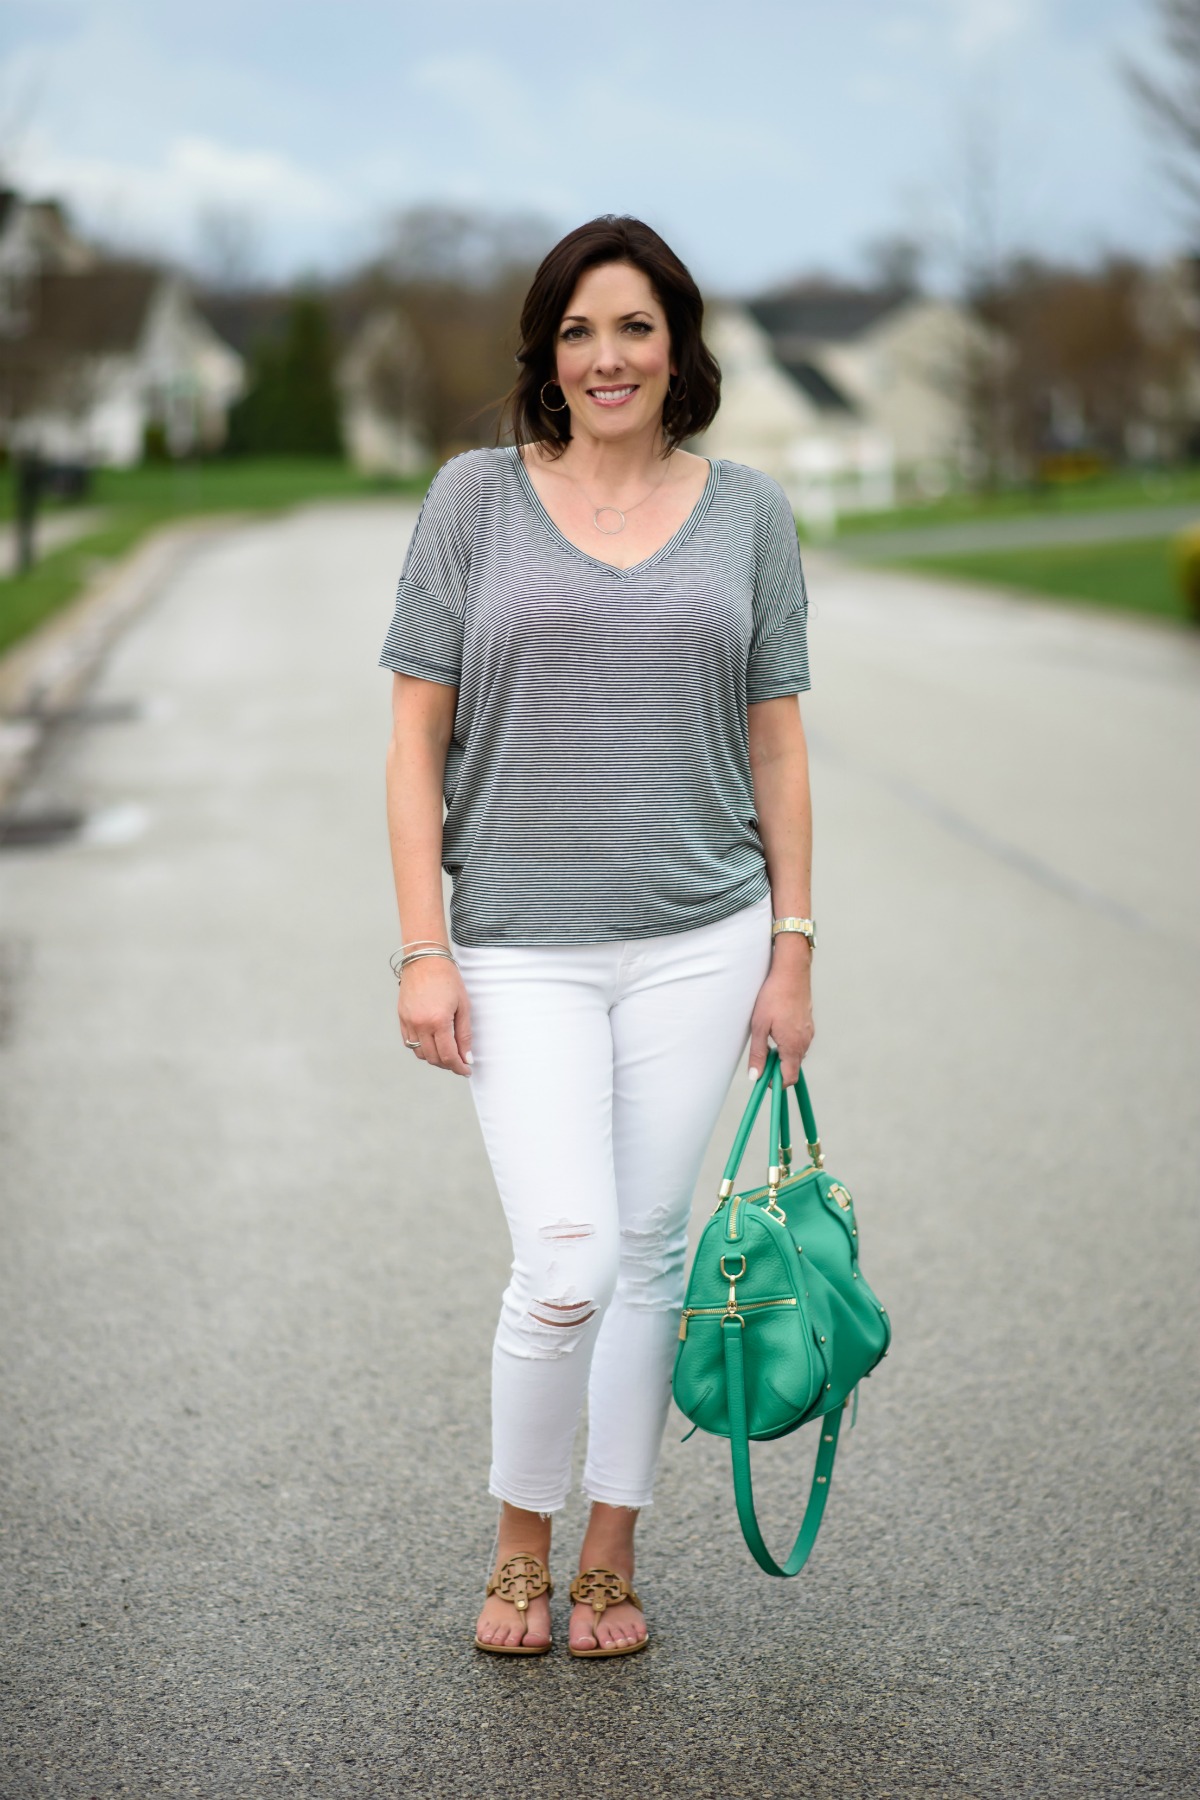 Casual Spring Outfits for Women Over 40: Navy and White Stripe Dolman Sleeve Top with White Jeans and Nude Sandals